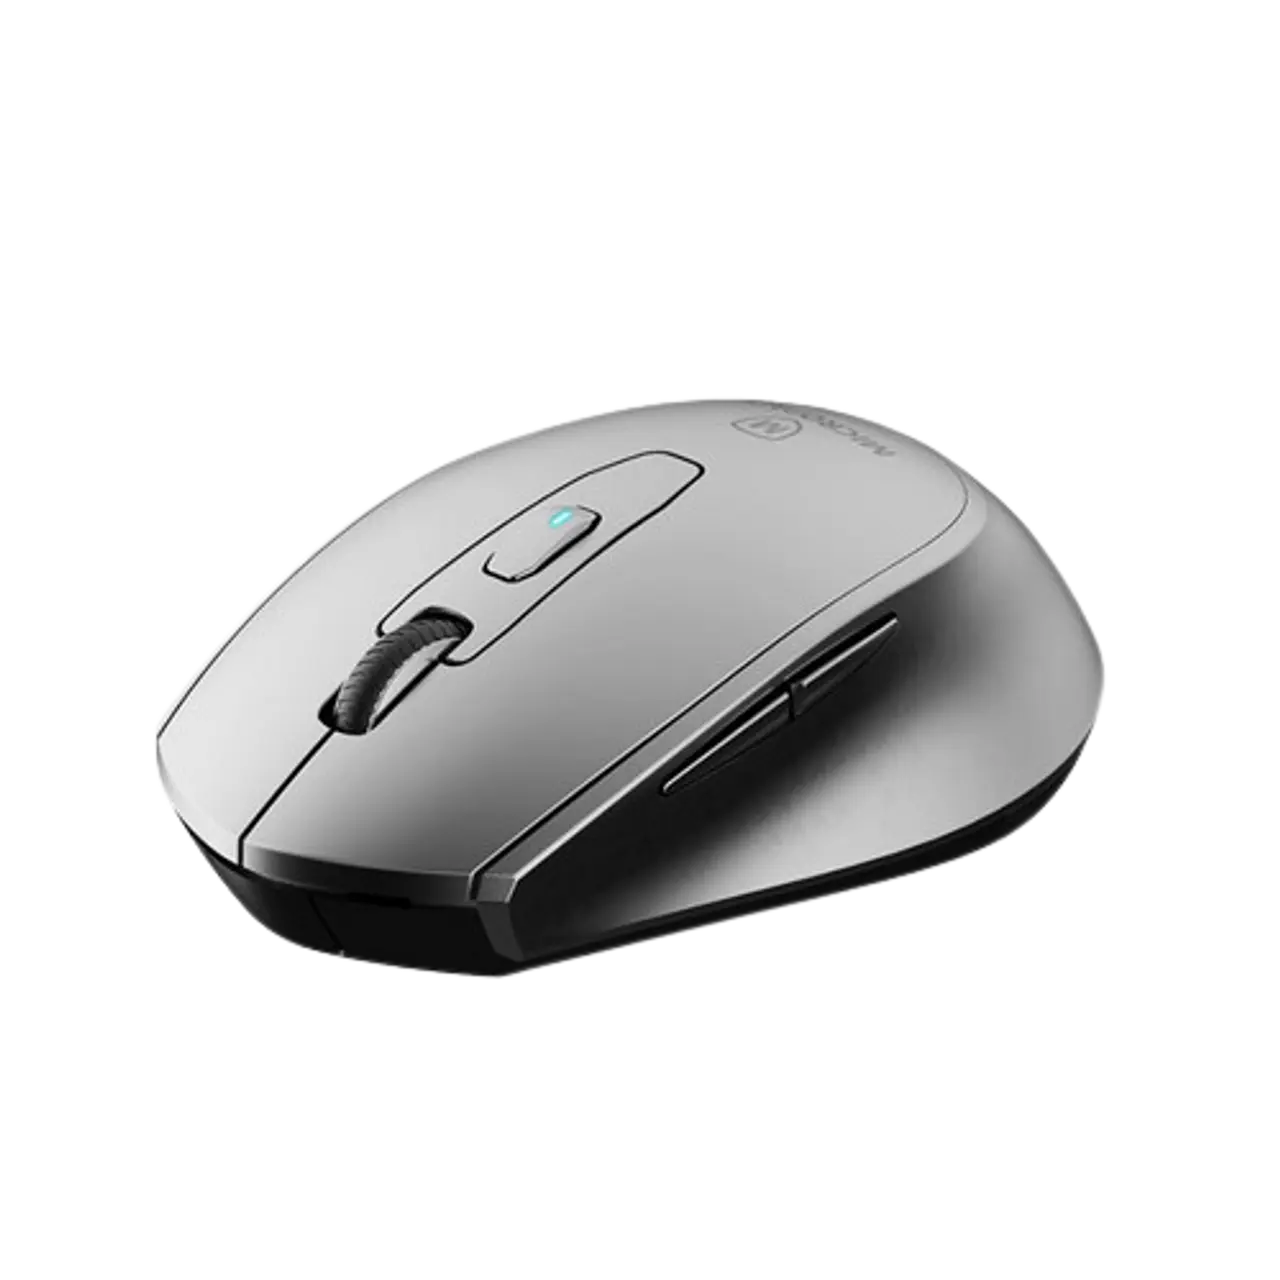 Micropack Bluetooth 5.0 and 2.4G Wireless Office Mouse, Grey | MP-730WT Micropack